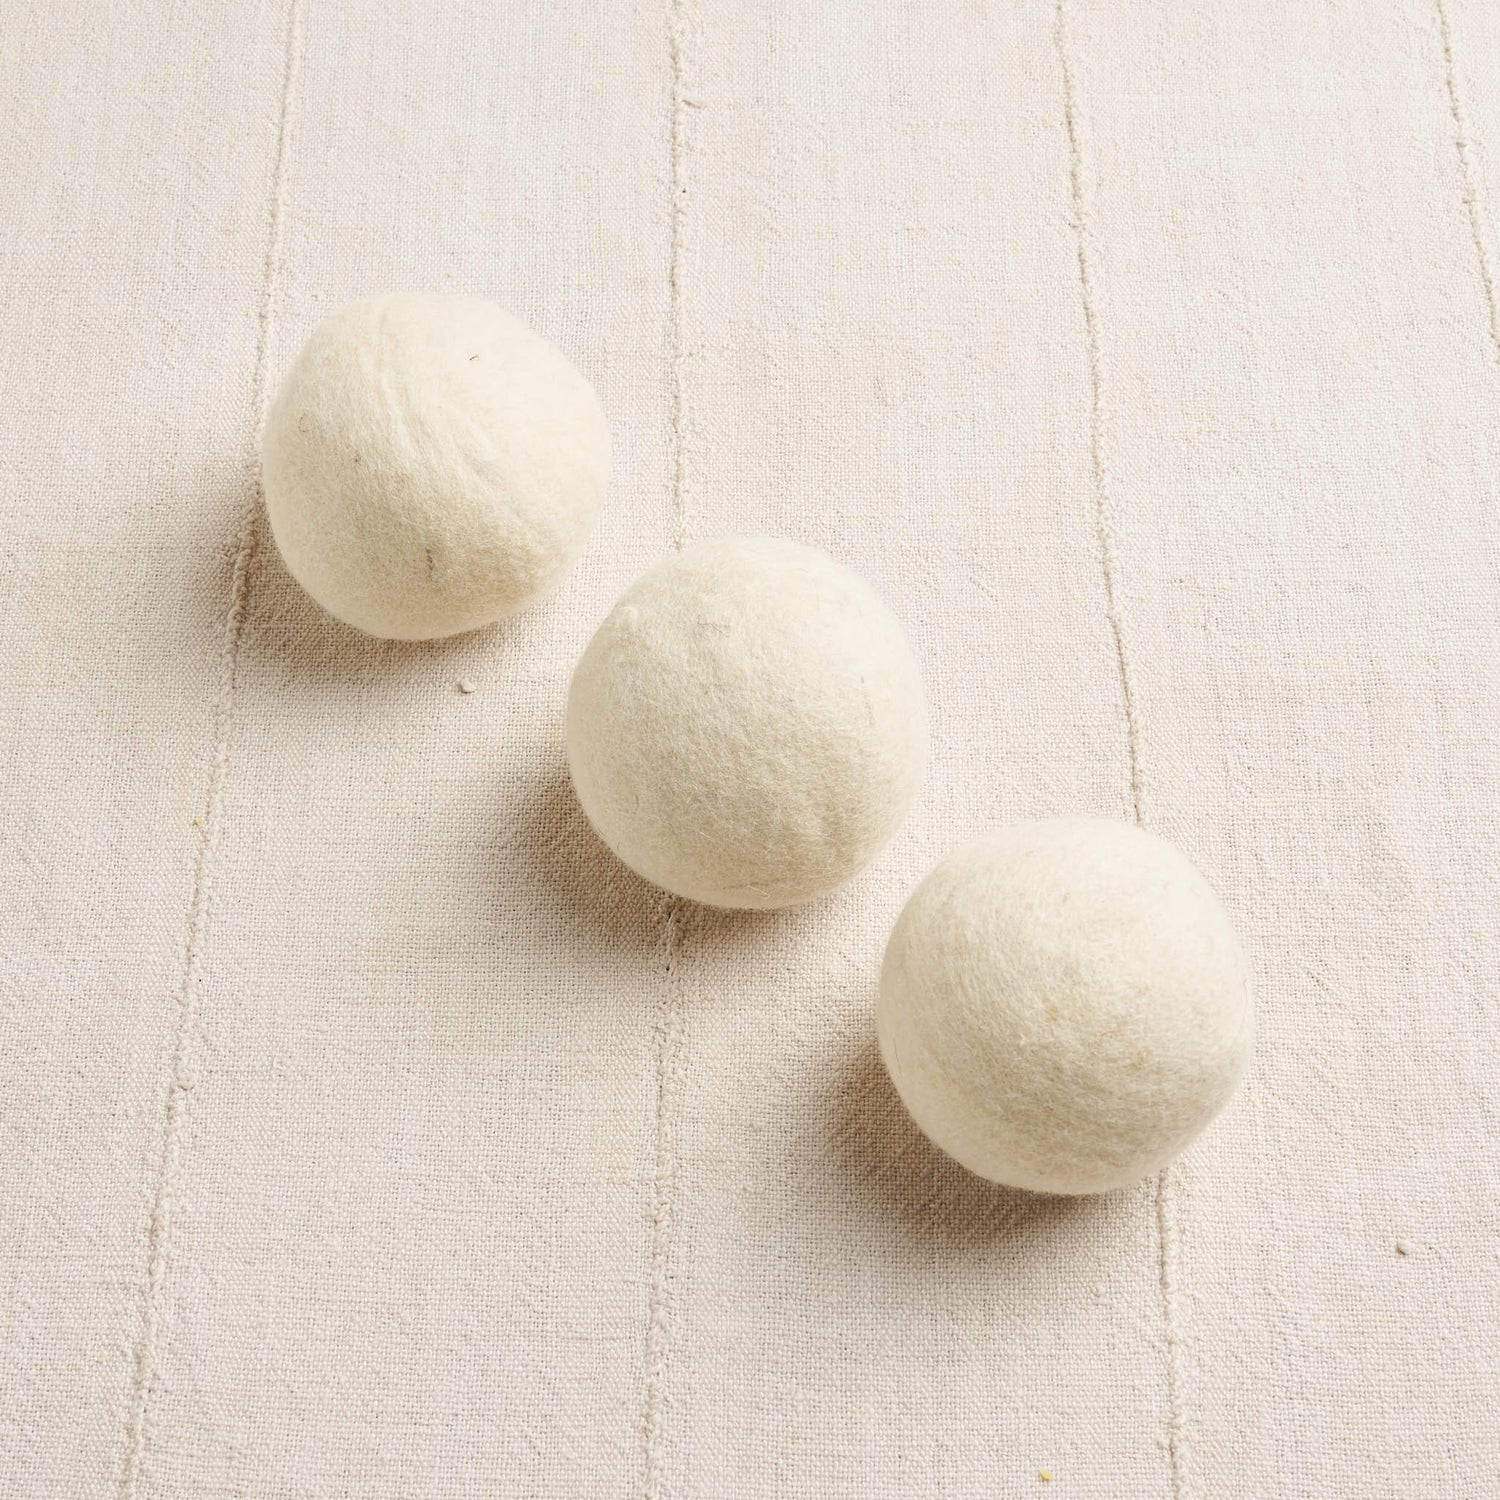 Climate Beneficial™ Wool Dryer Balls – Coyuchi